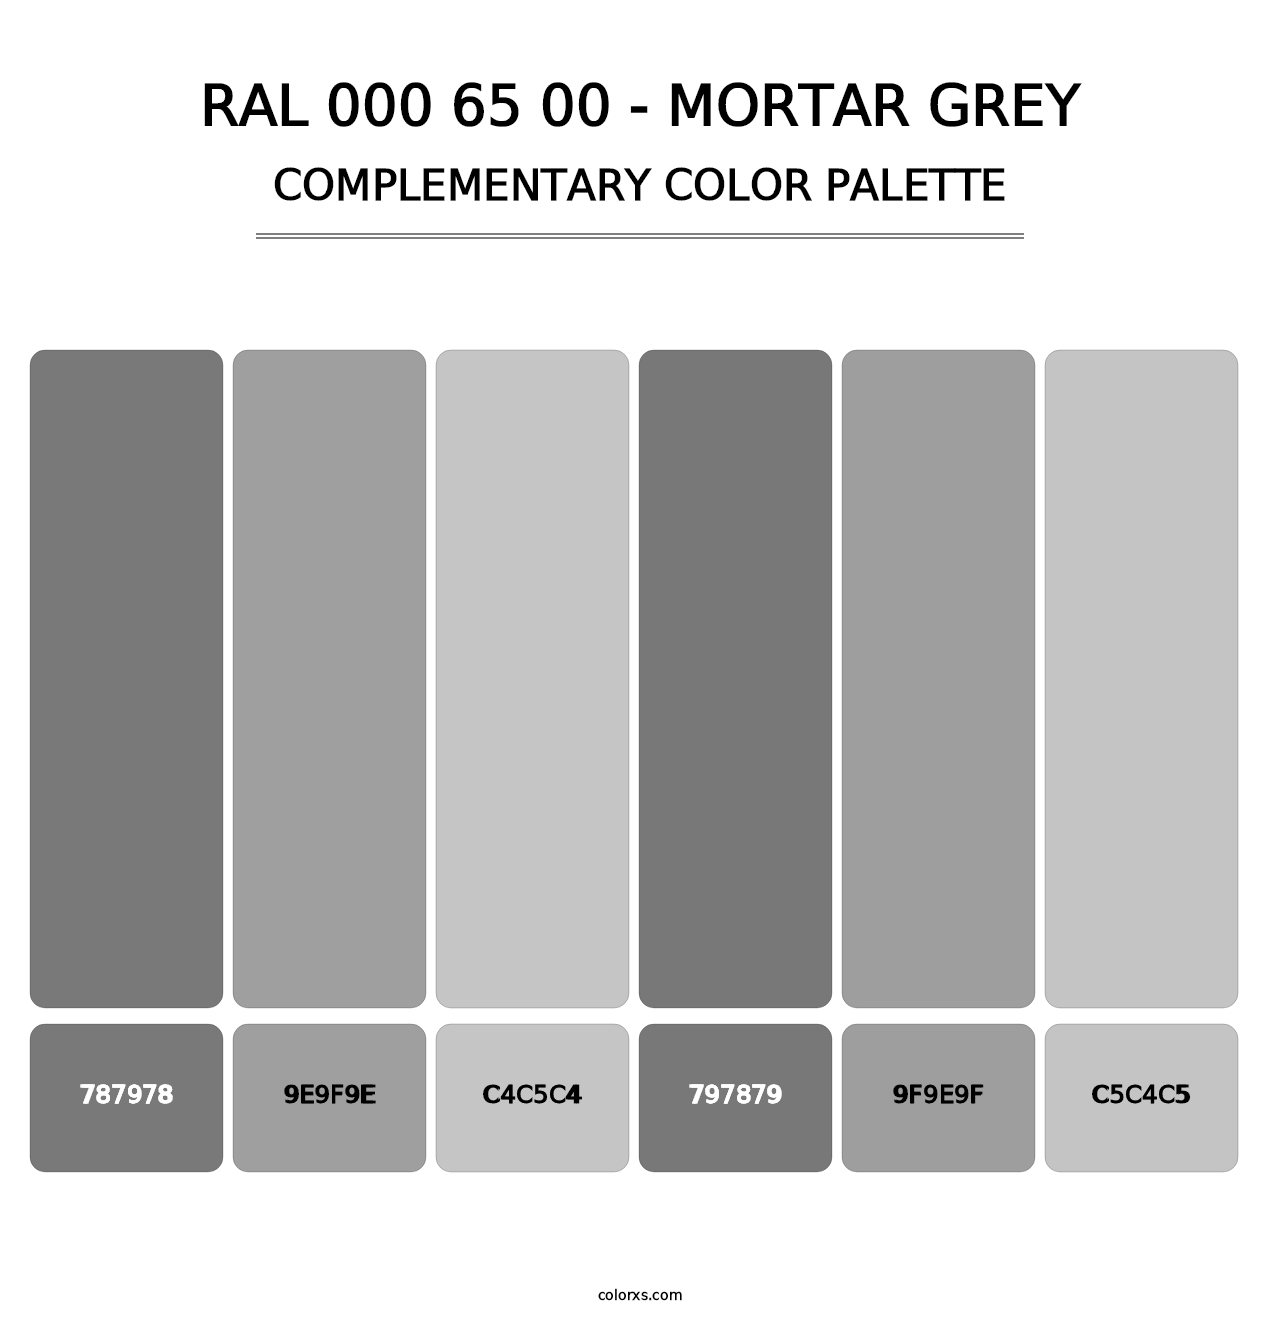 RAL 000 65 00 - Mortar Grey - Complementary Color Palette